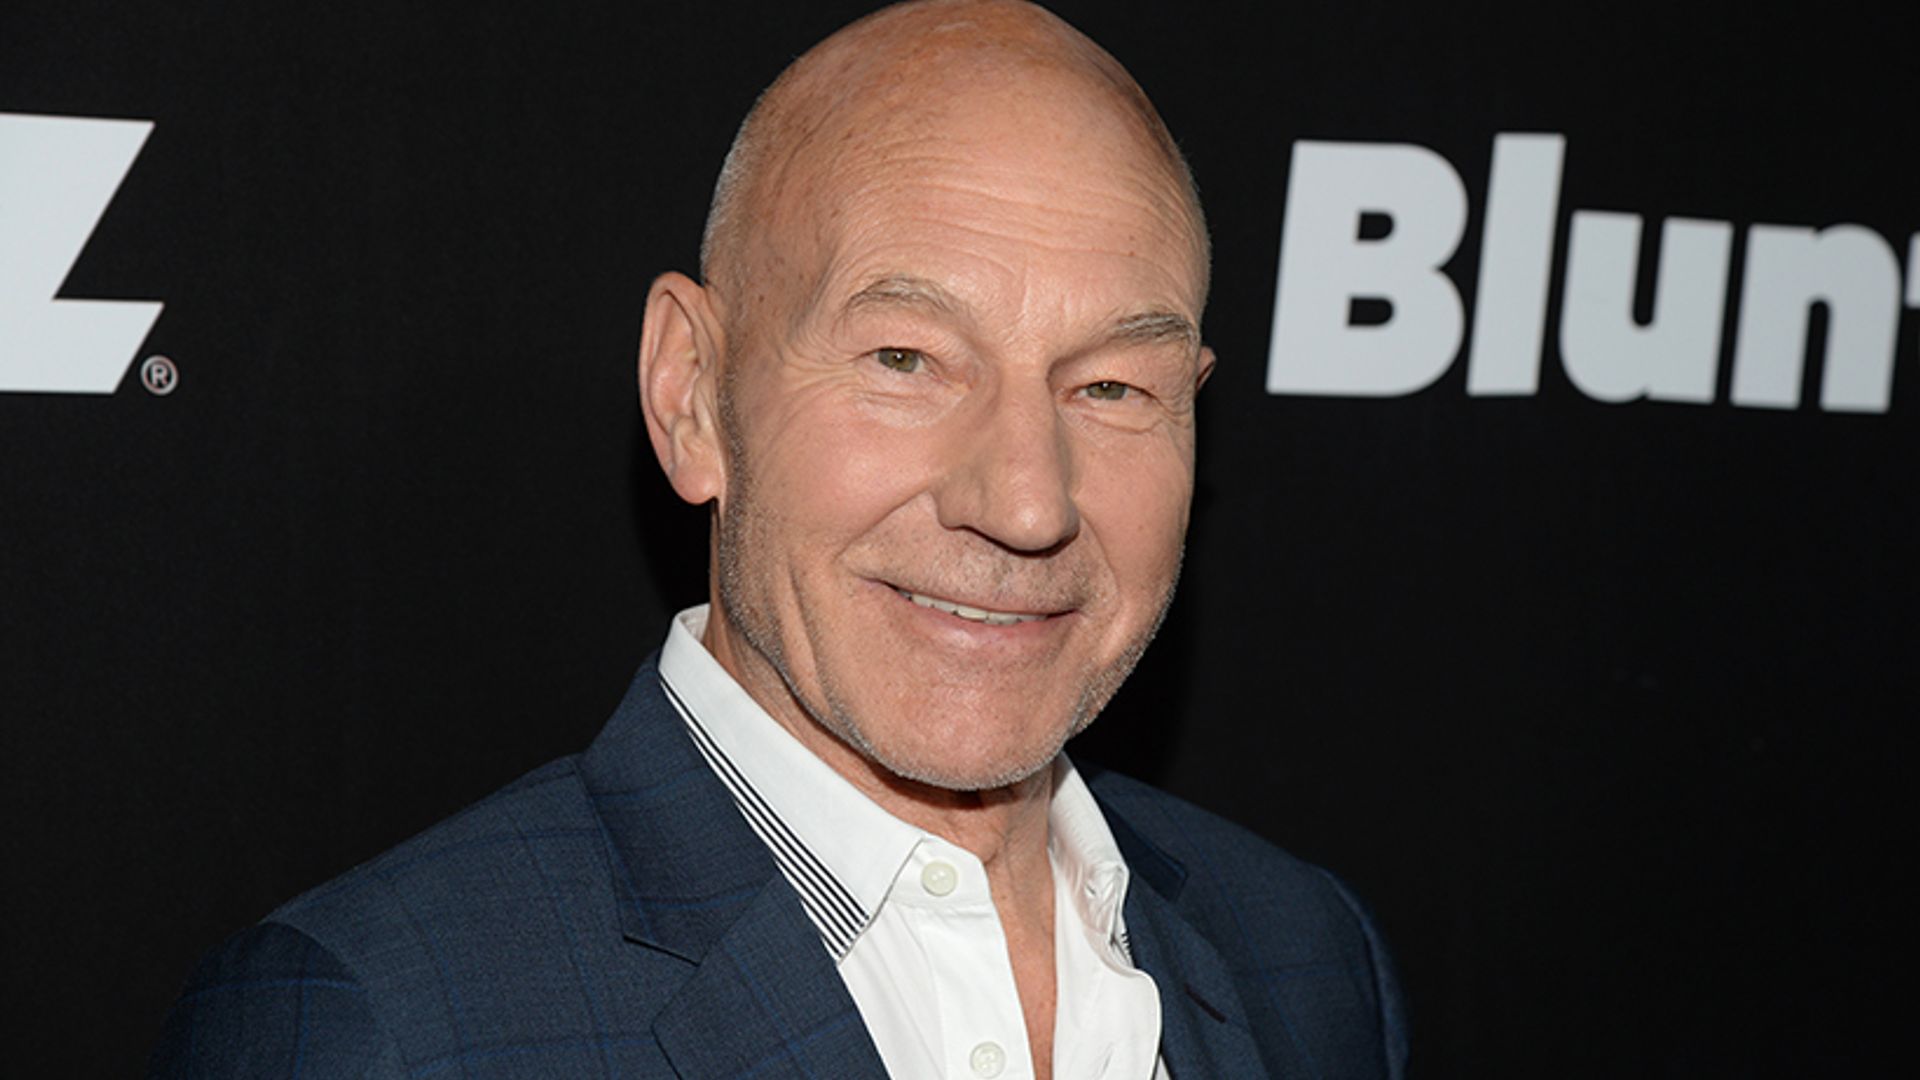 Sir Patrick Stewart shares his childhood story in HELLO! to shine a light on domestic abuse